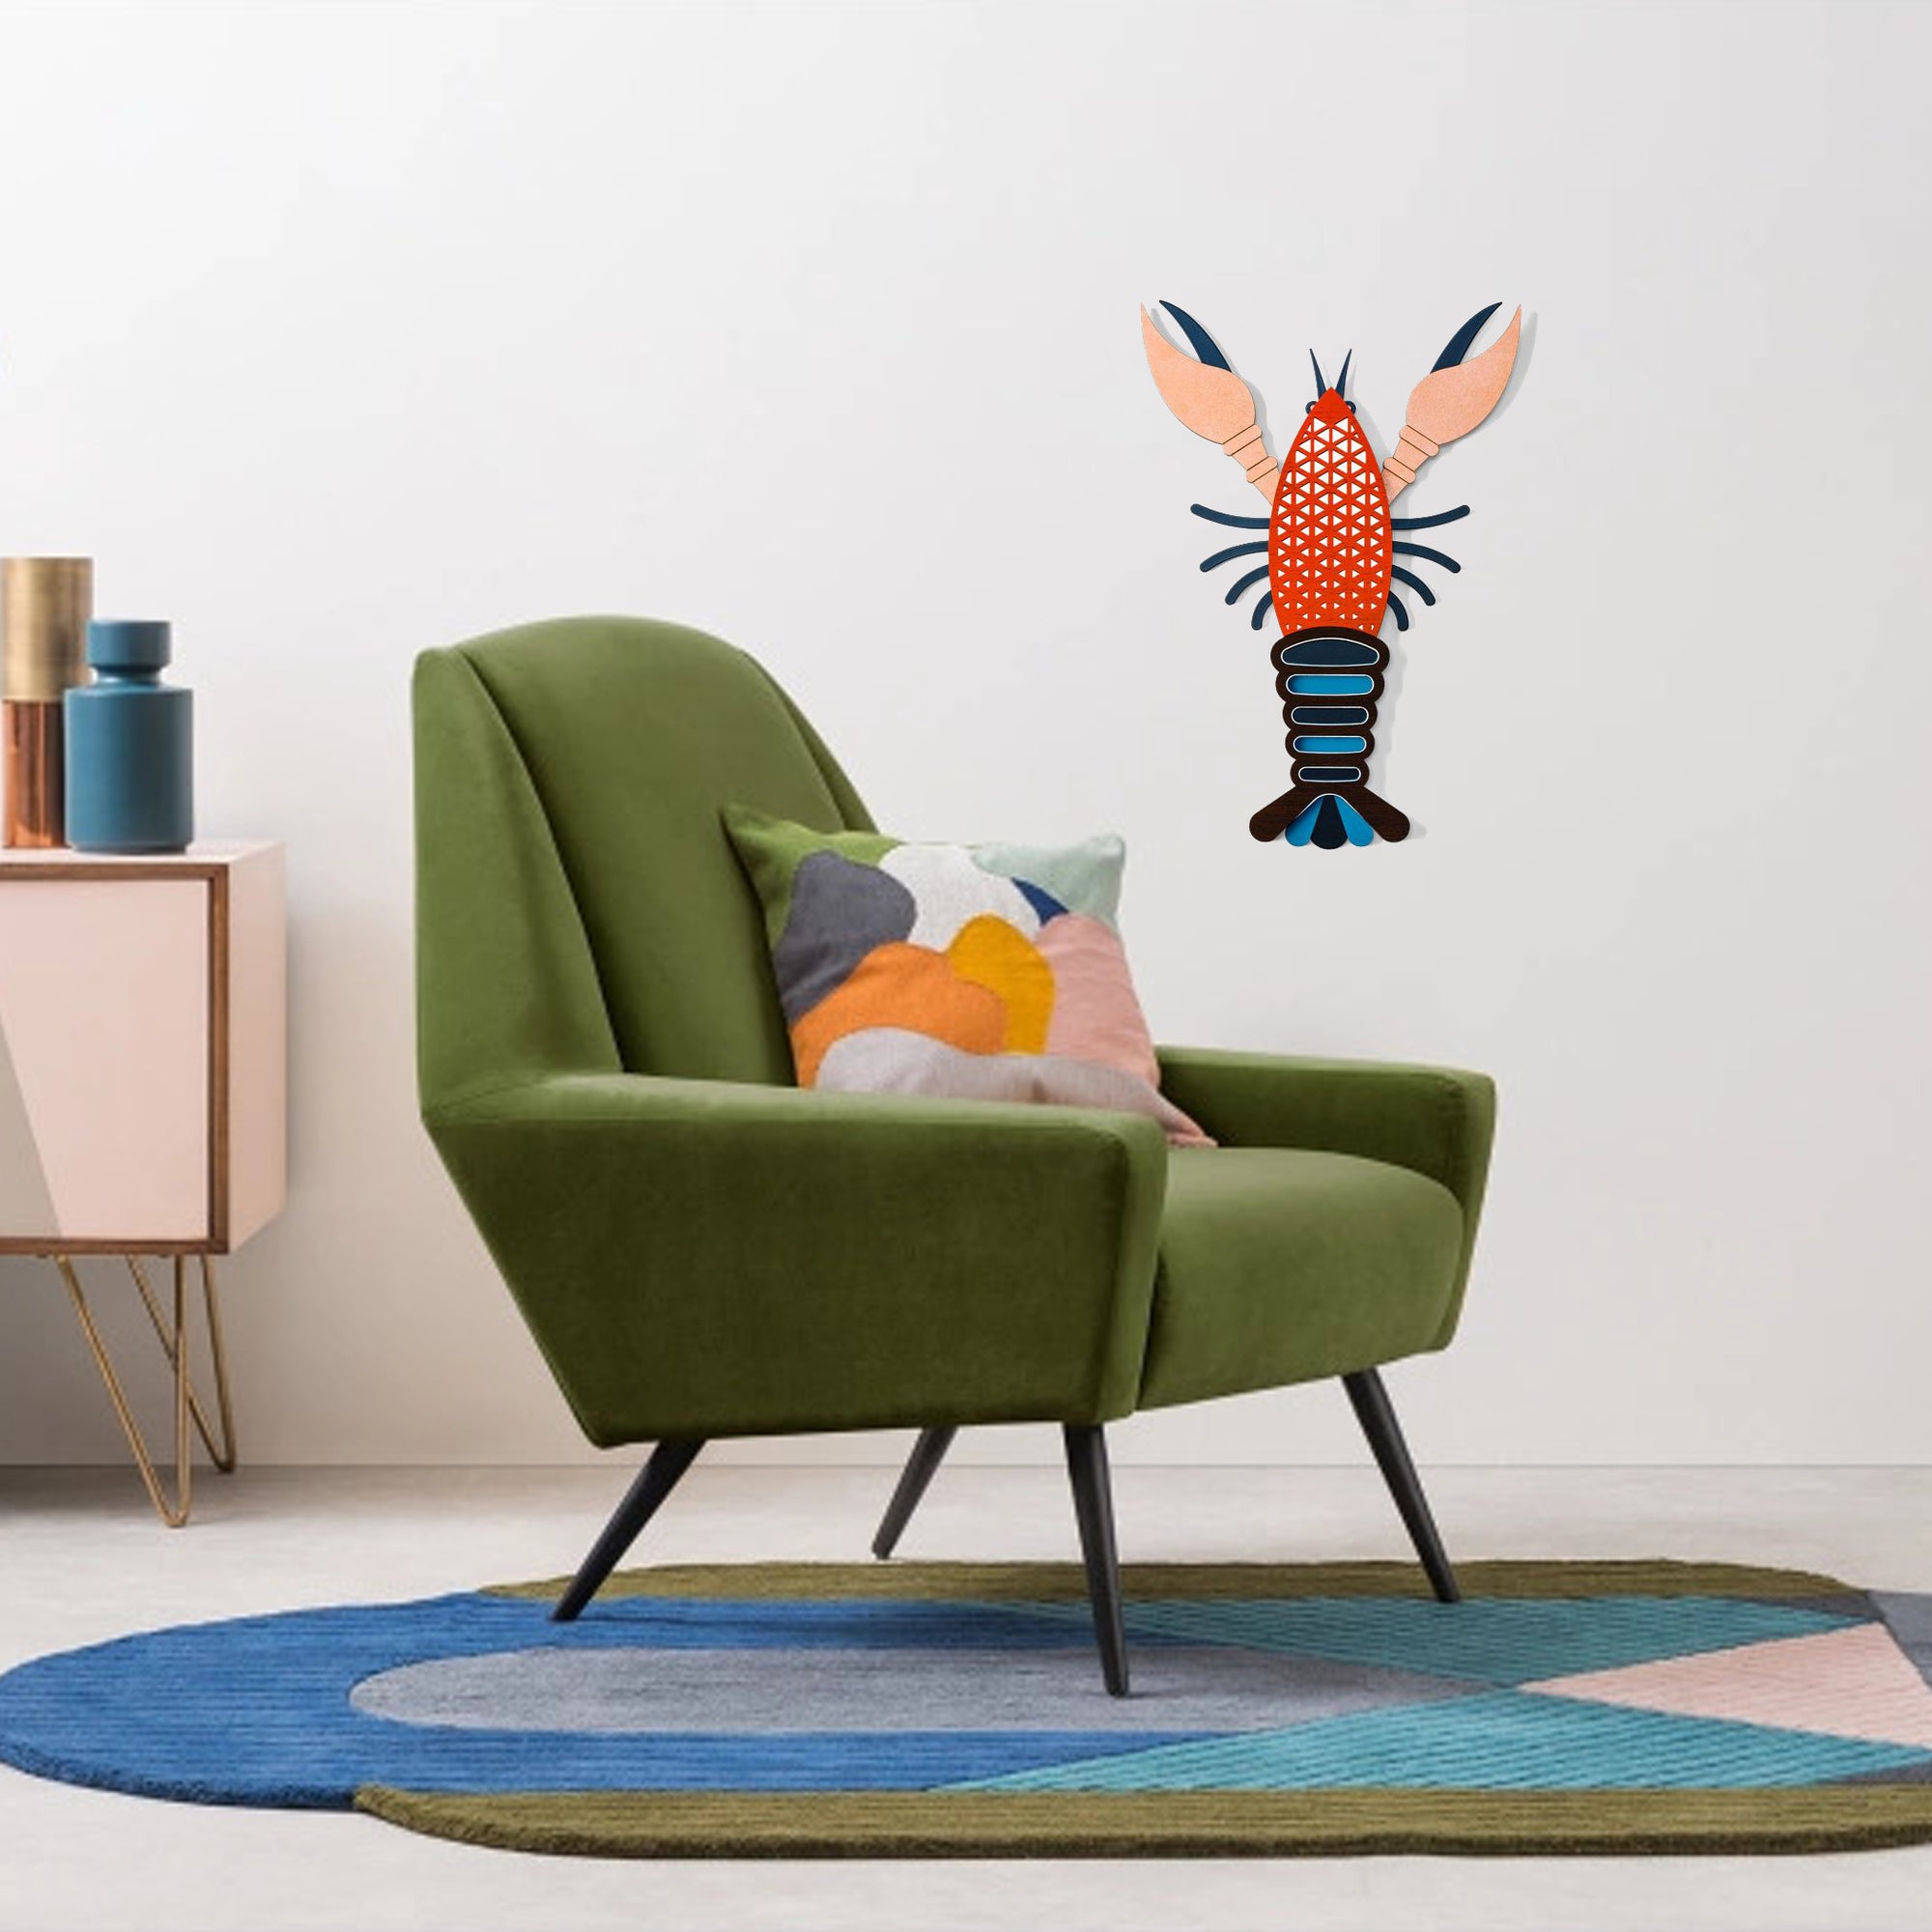 Colorful Wall Art with Lobster